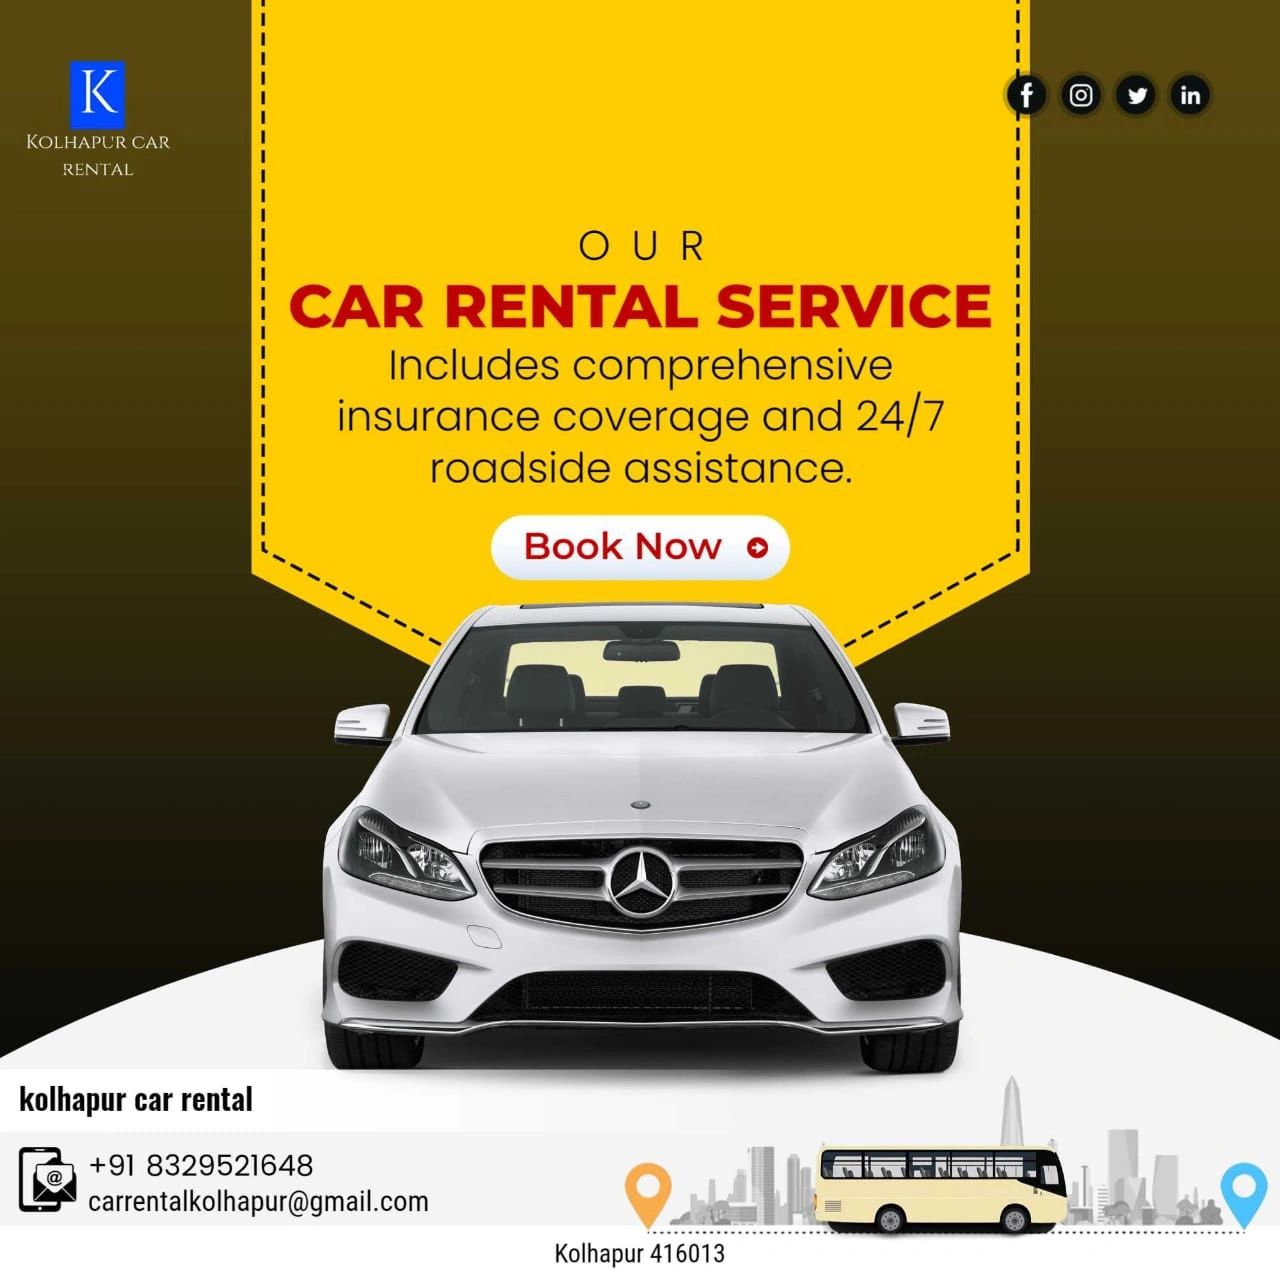 Book Car Rentals at Kolhapur

Great offers for cheap car rental, daily, weekly long term rentals